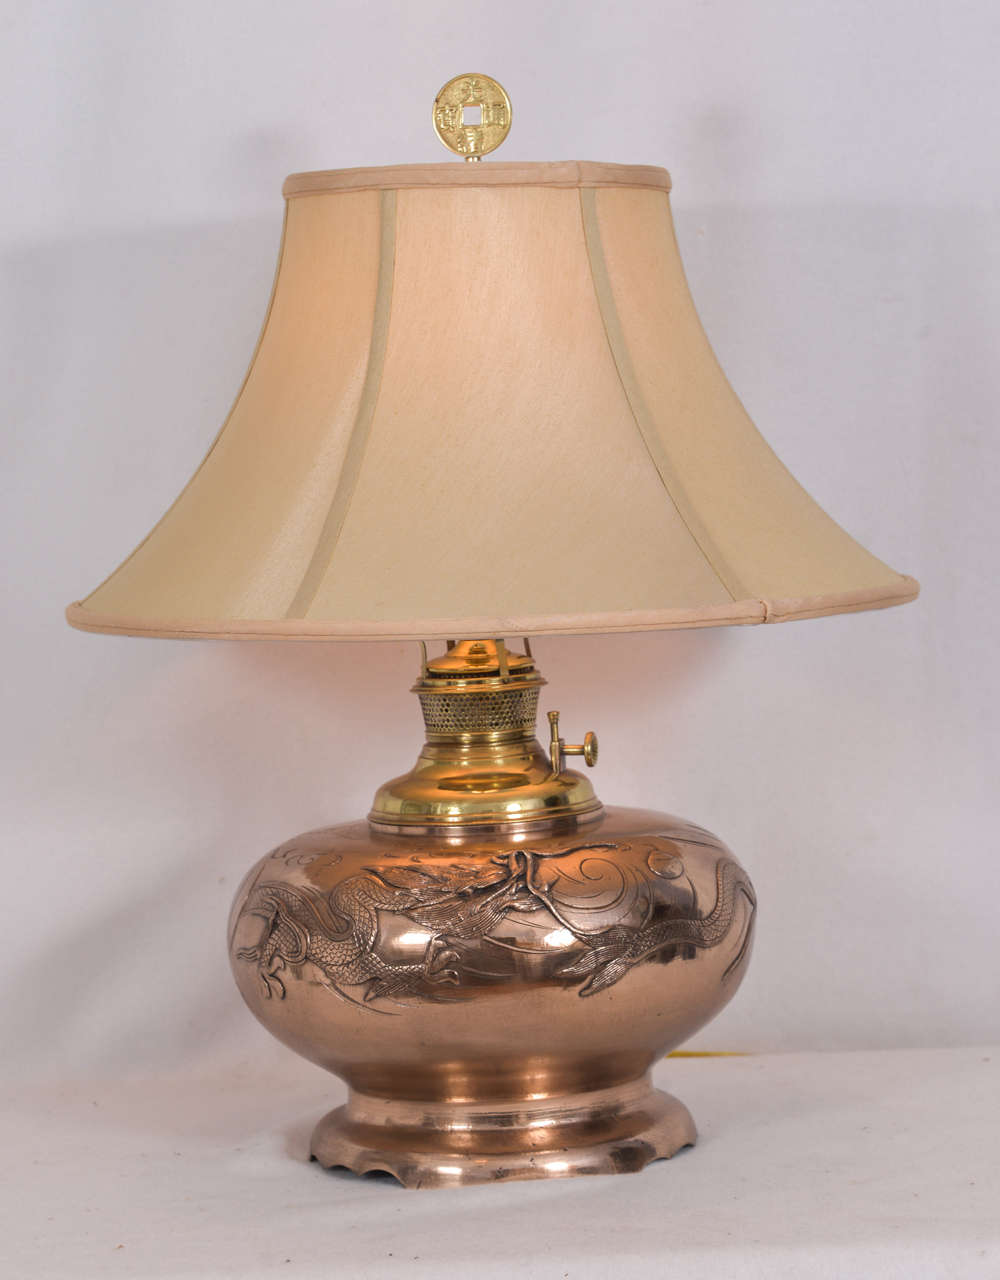 Cast copper, Asian design, converted oil lamp with an Asian finial. The lamp has been polished and sealed and electrified. The lamp is priced without the lampshade shown. The oil font was made by the Aladdin lamp company in early 1900s and inserted